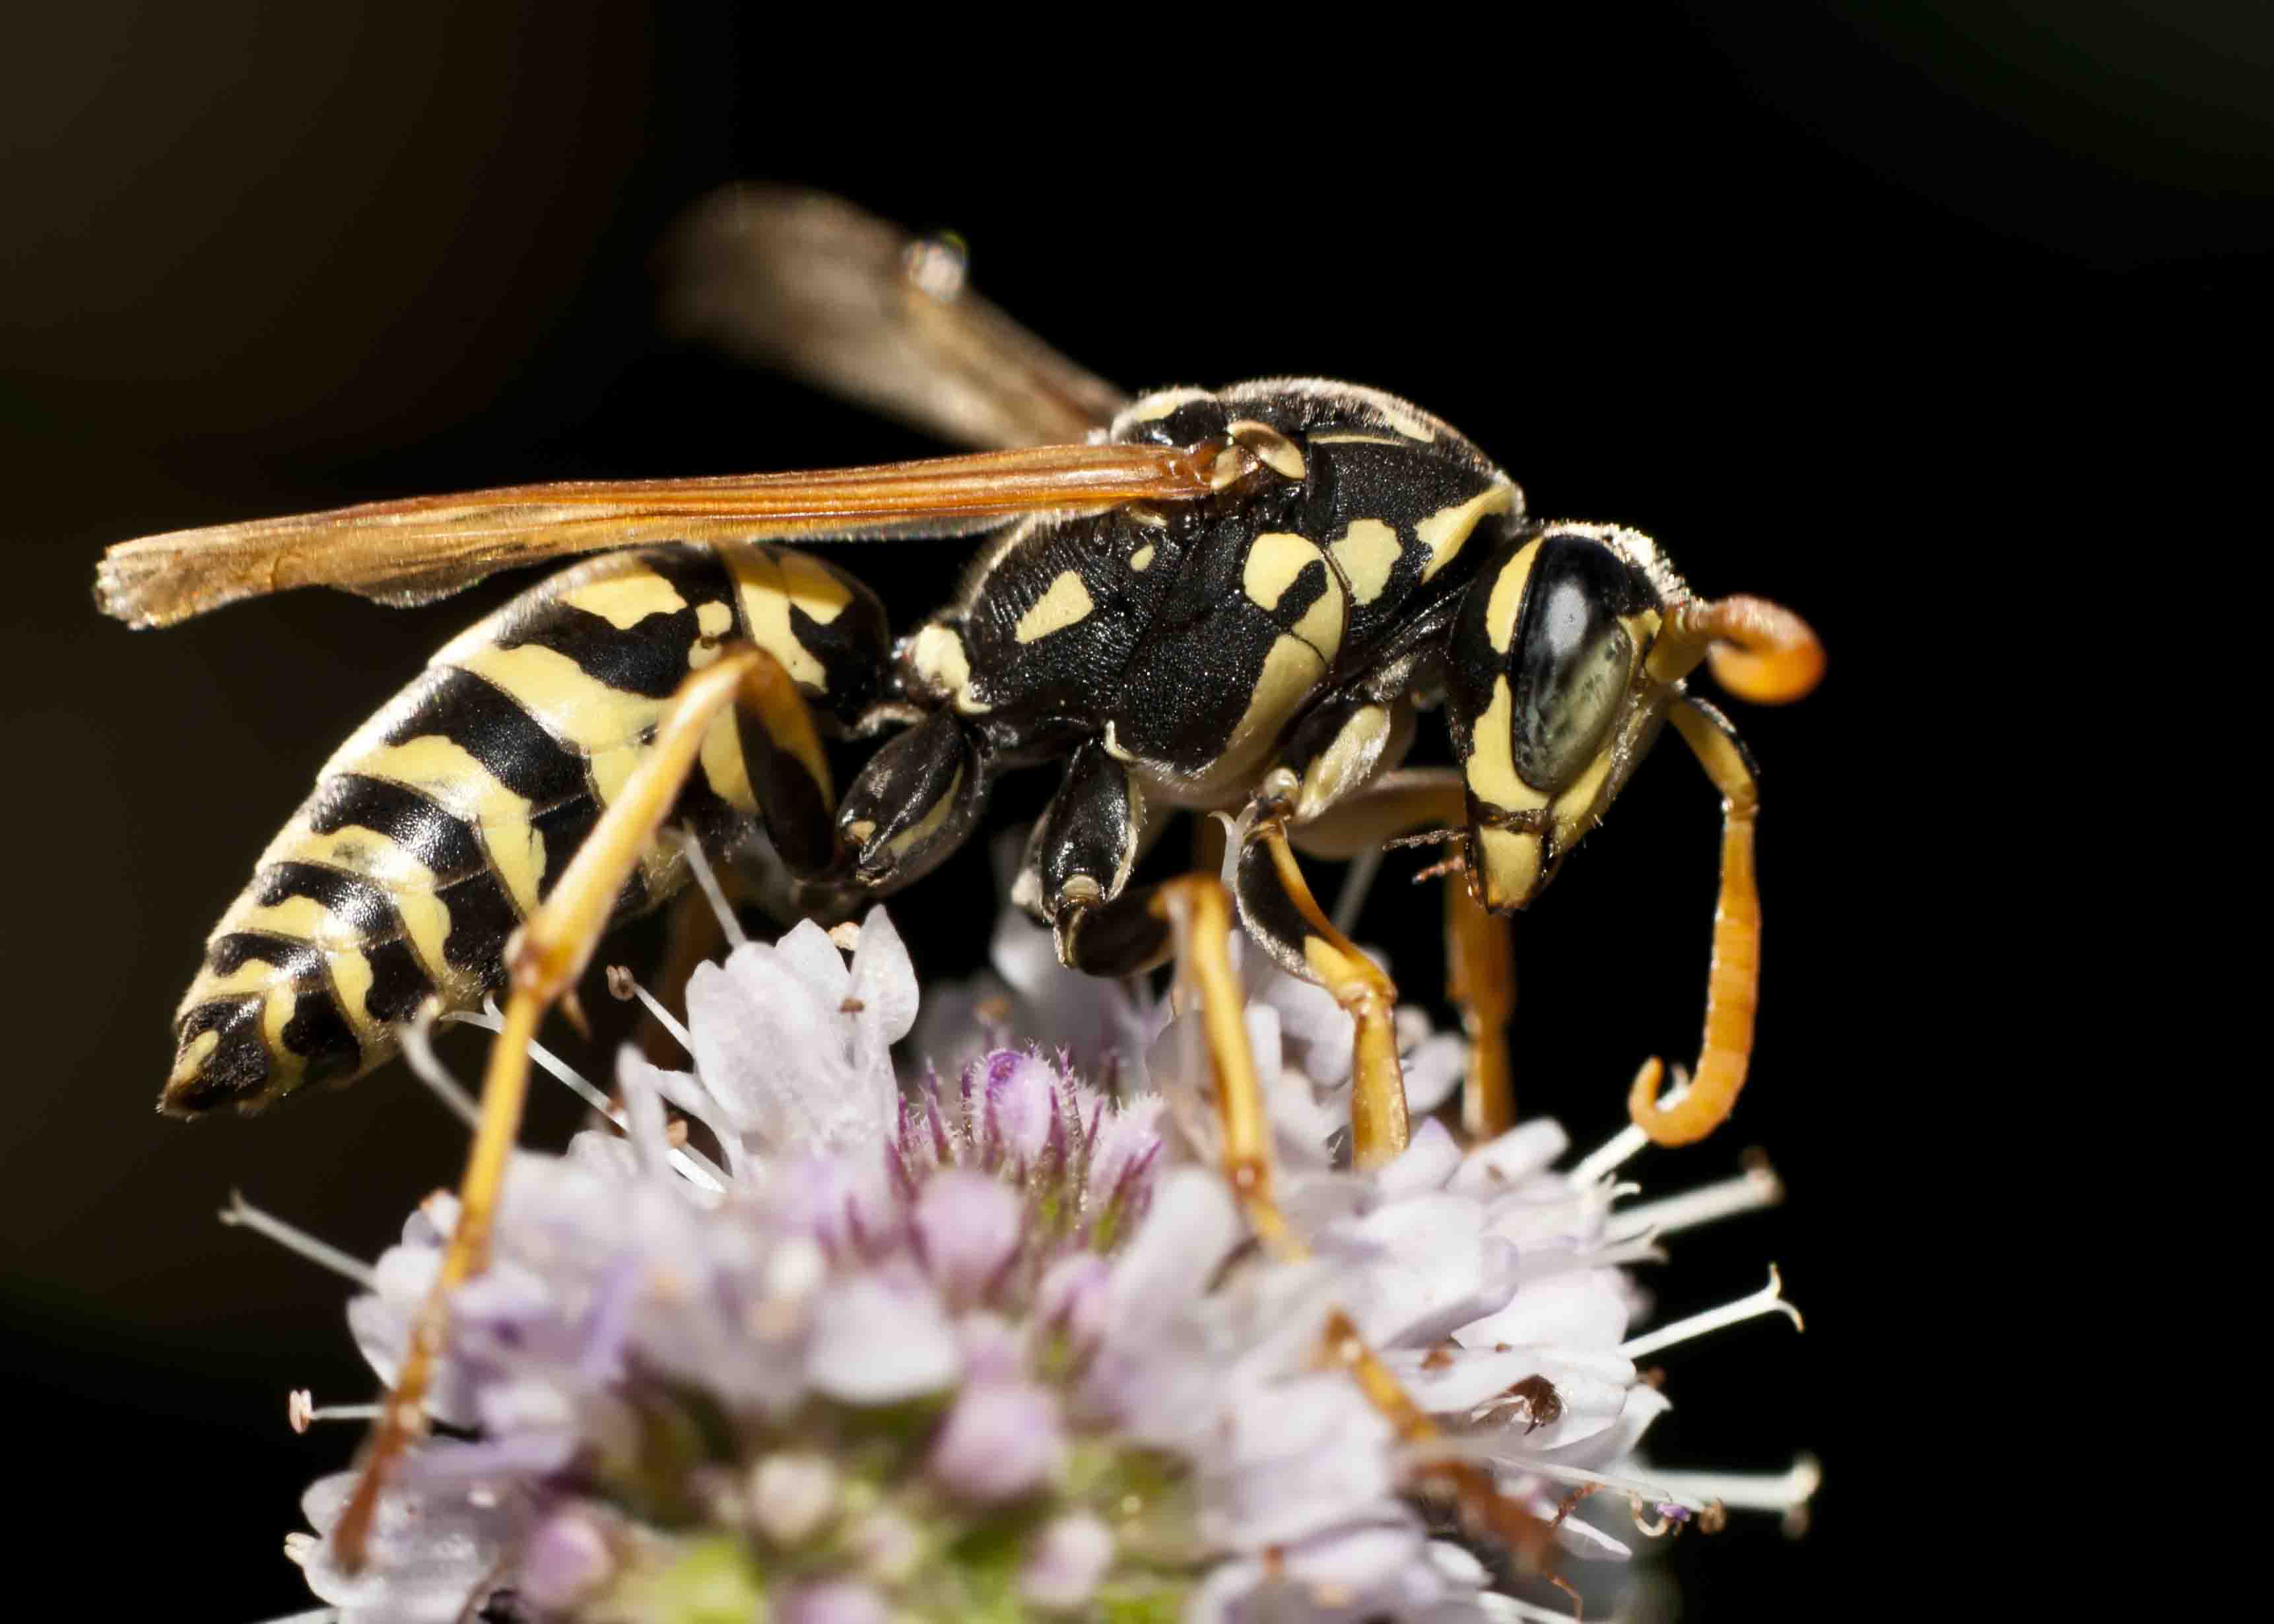 Yellow Jacket Removal: How to Tell Yellow Jackets from Bees